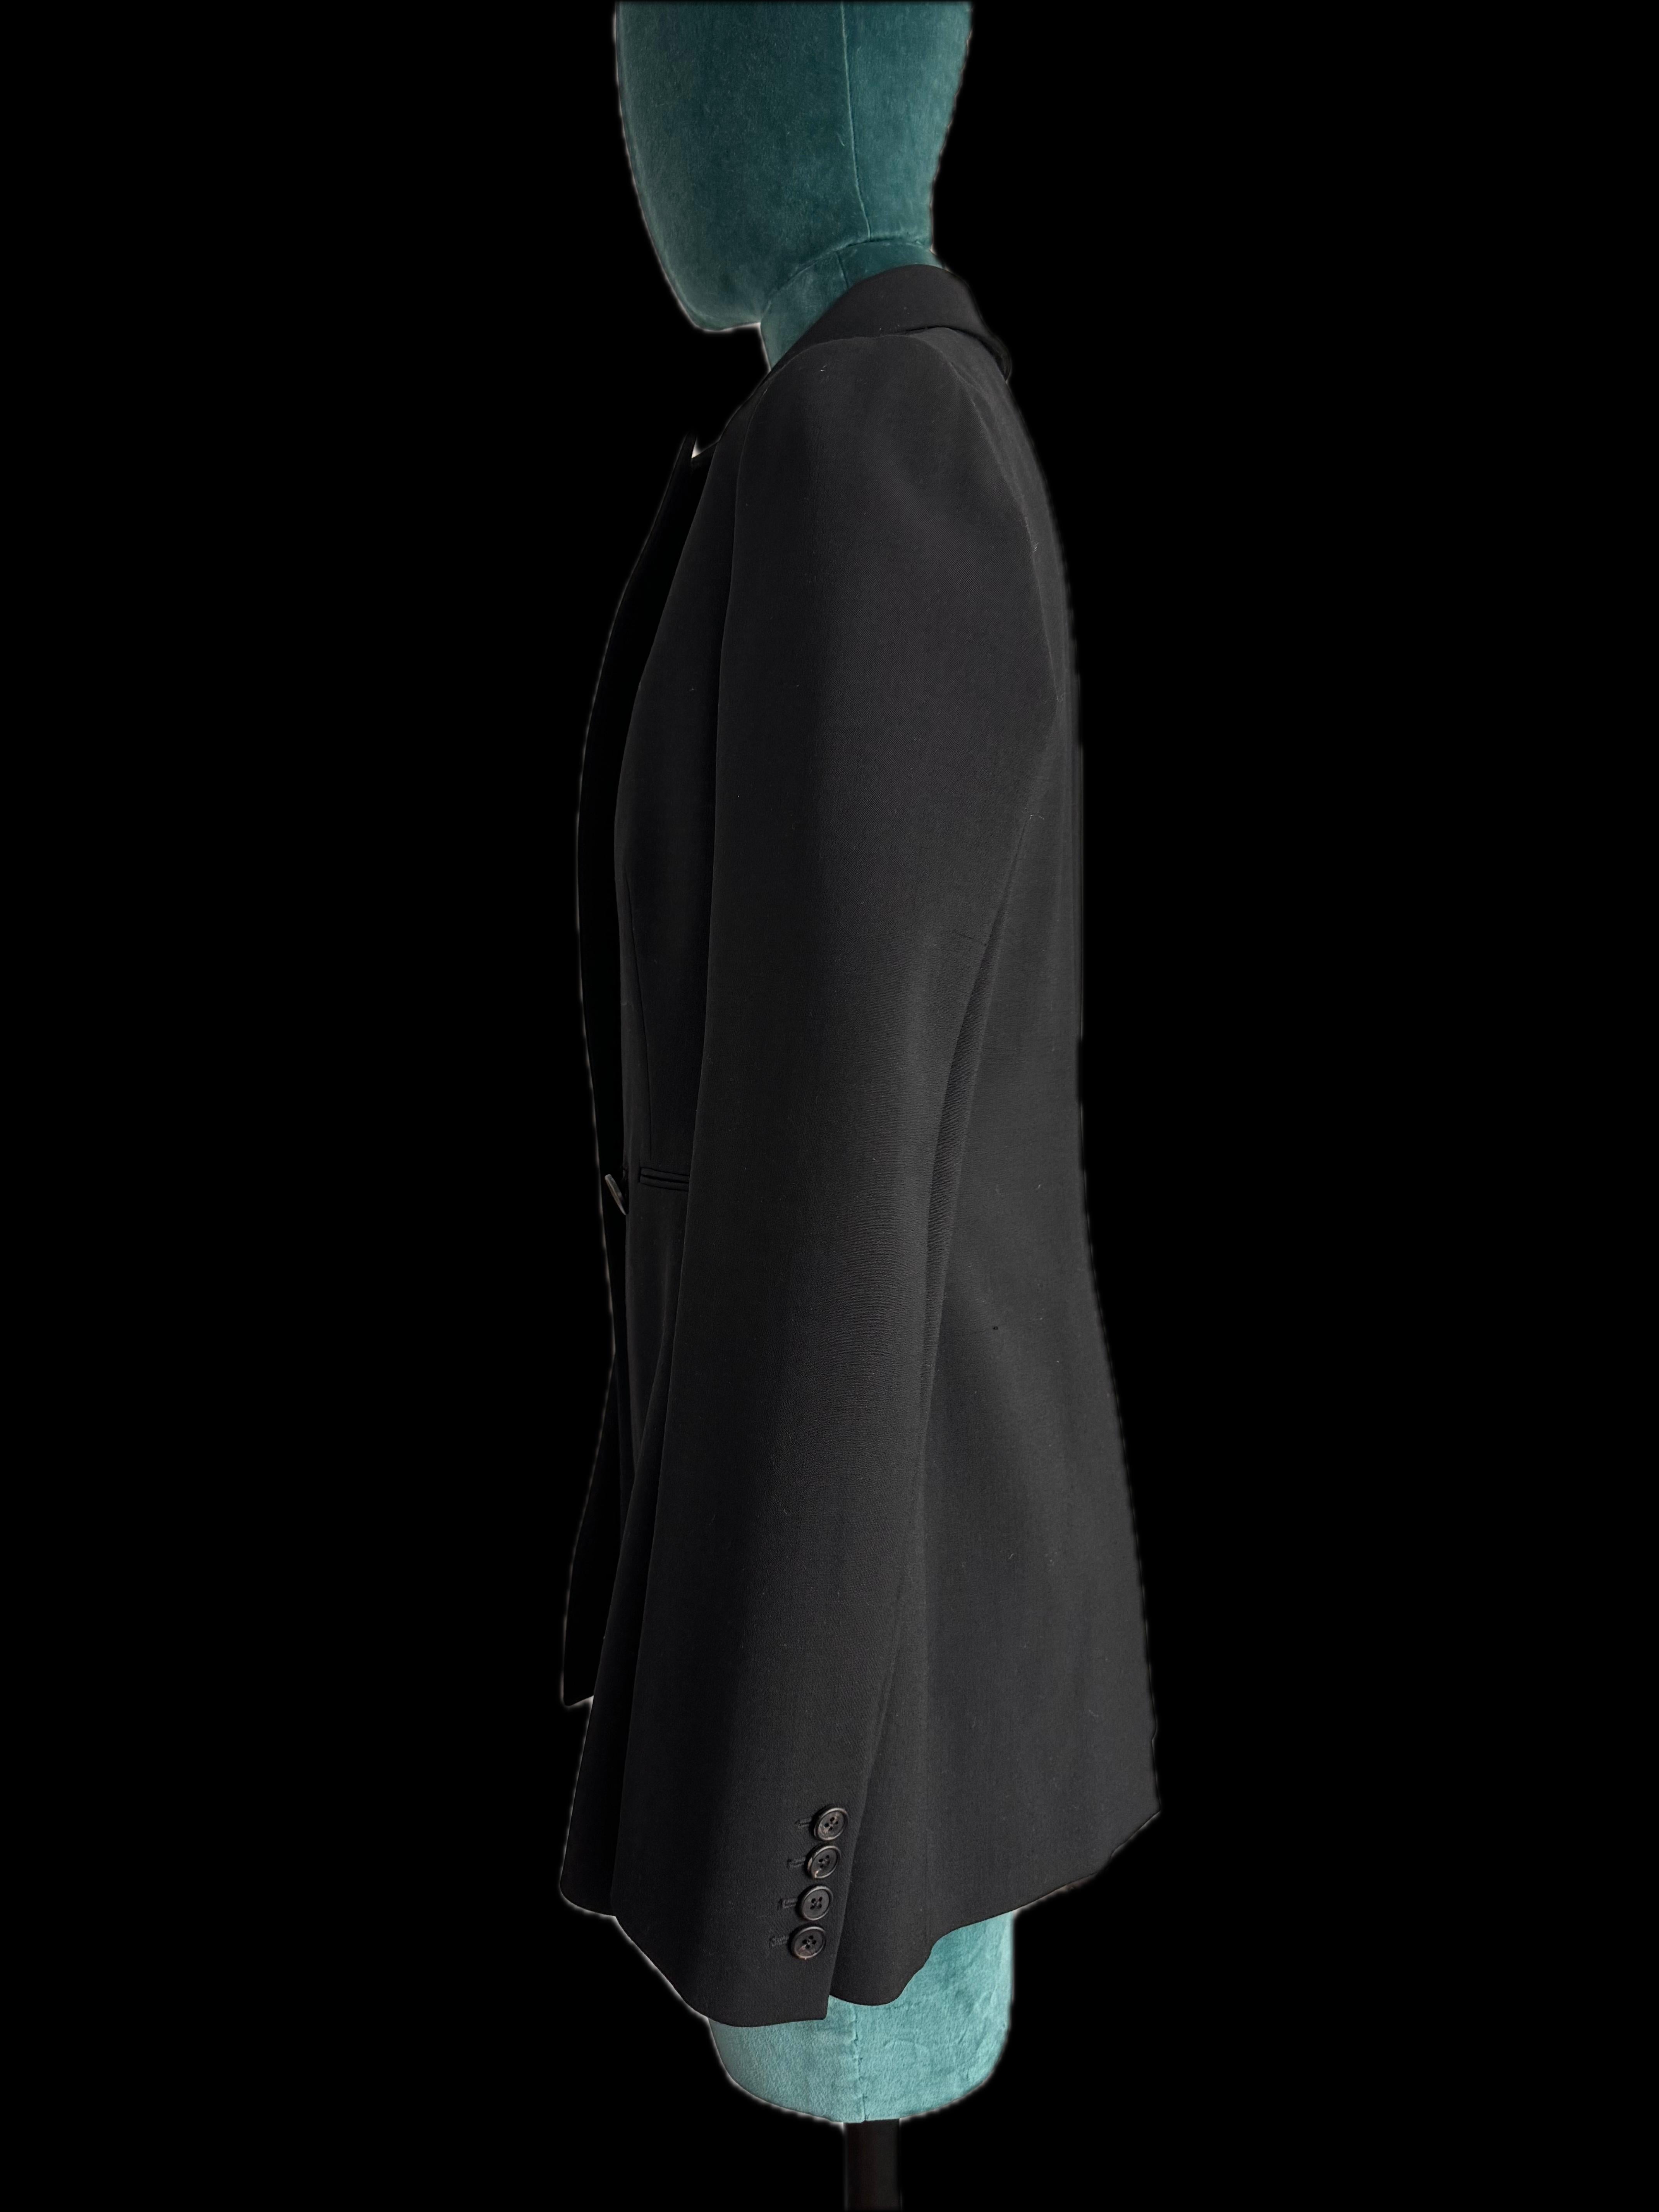 Introducing the epitome of sophistication and timeless elegance: The Row Ciel Jacket in Wool Crepe. Crafted with meticulous attention to detail and designed to perfection, this exquisite jacket is brand new with tags and promises to elevate any